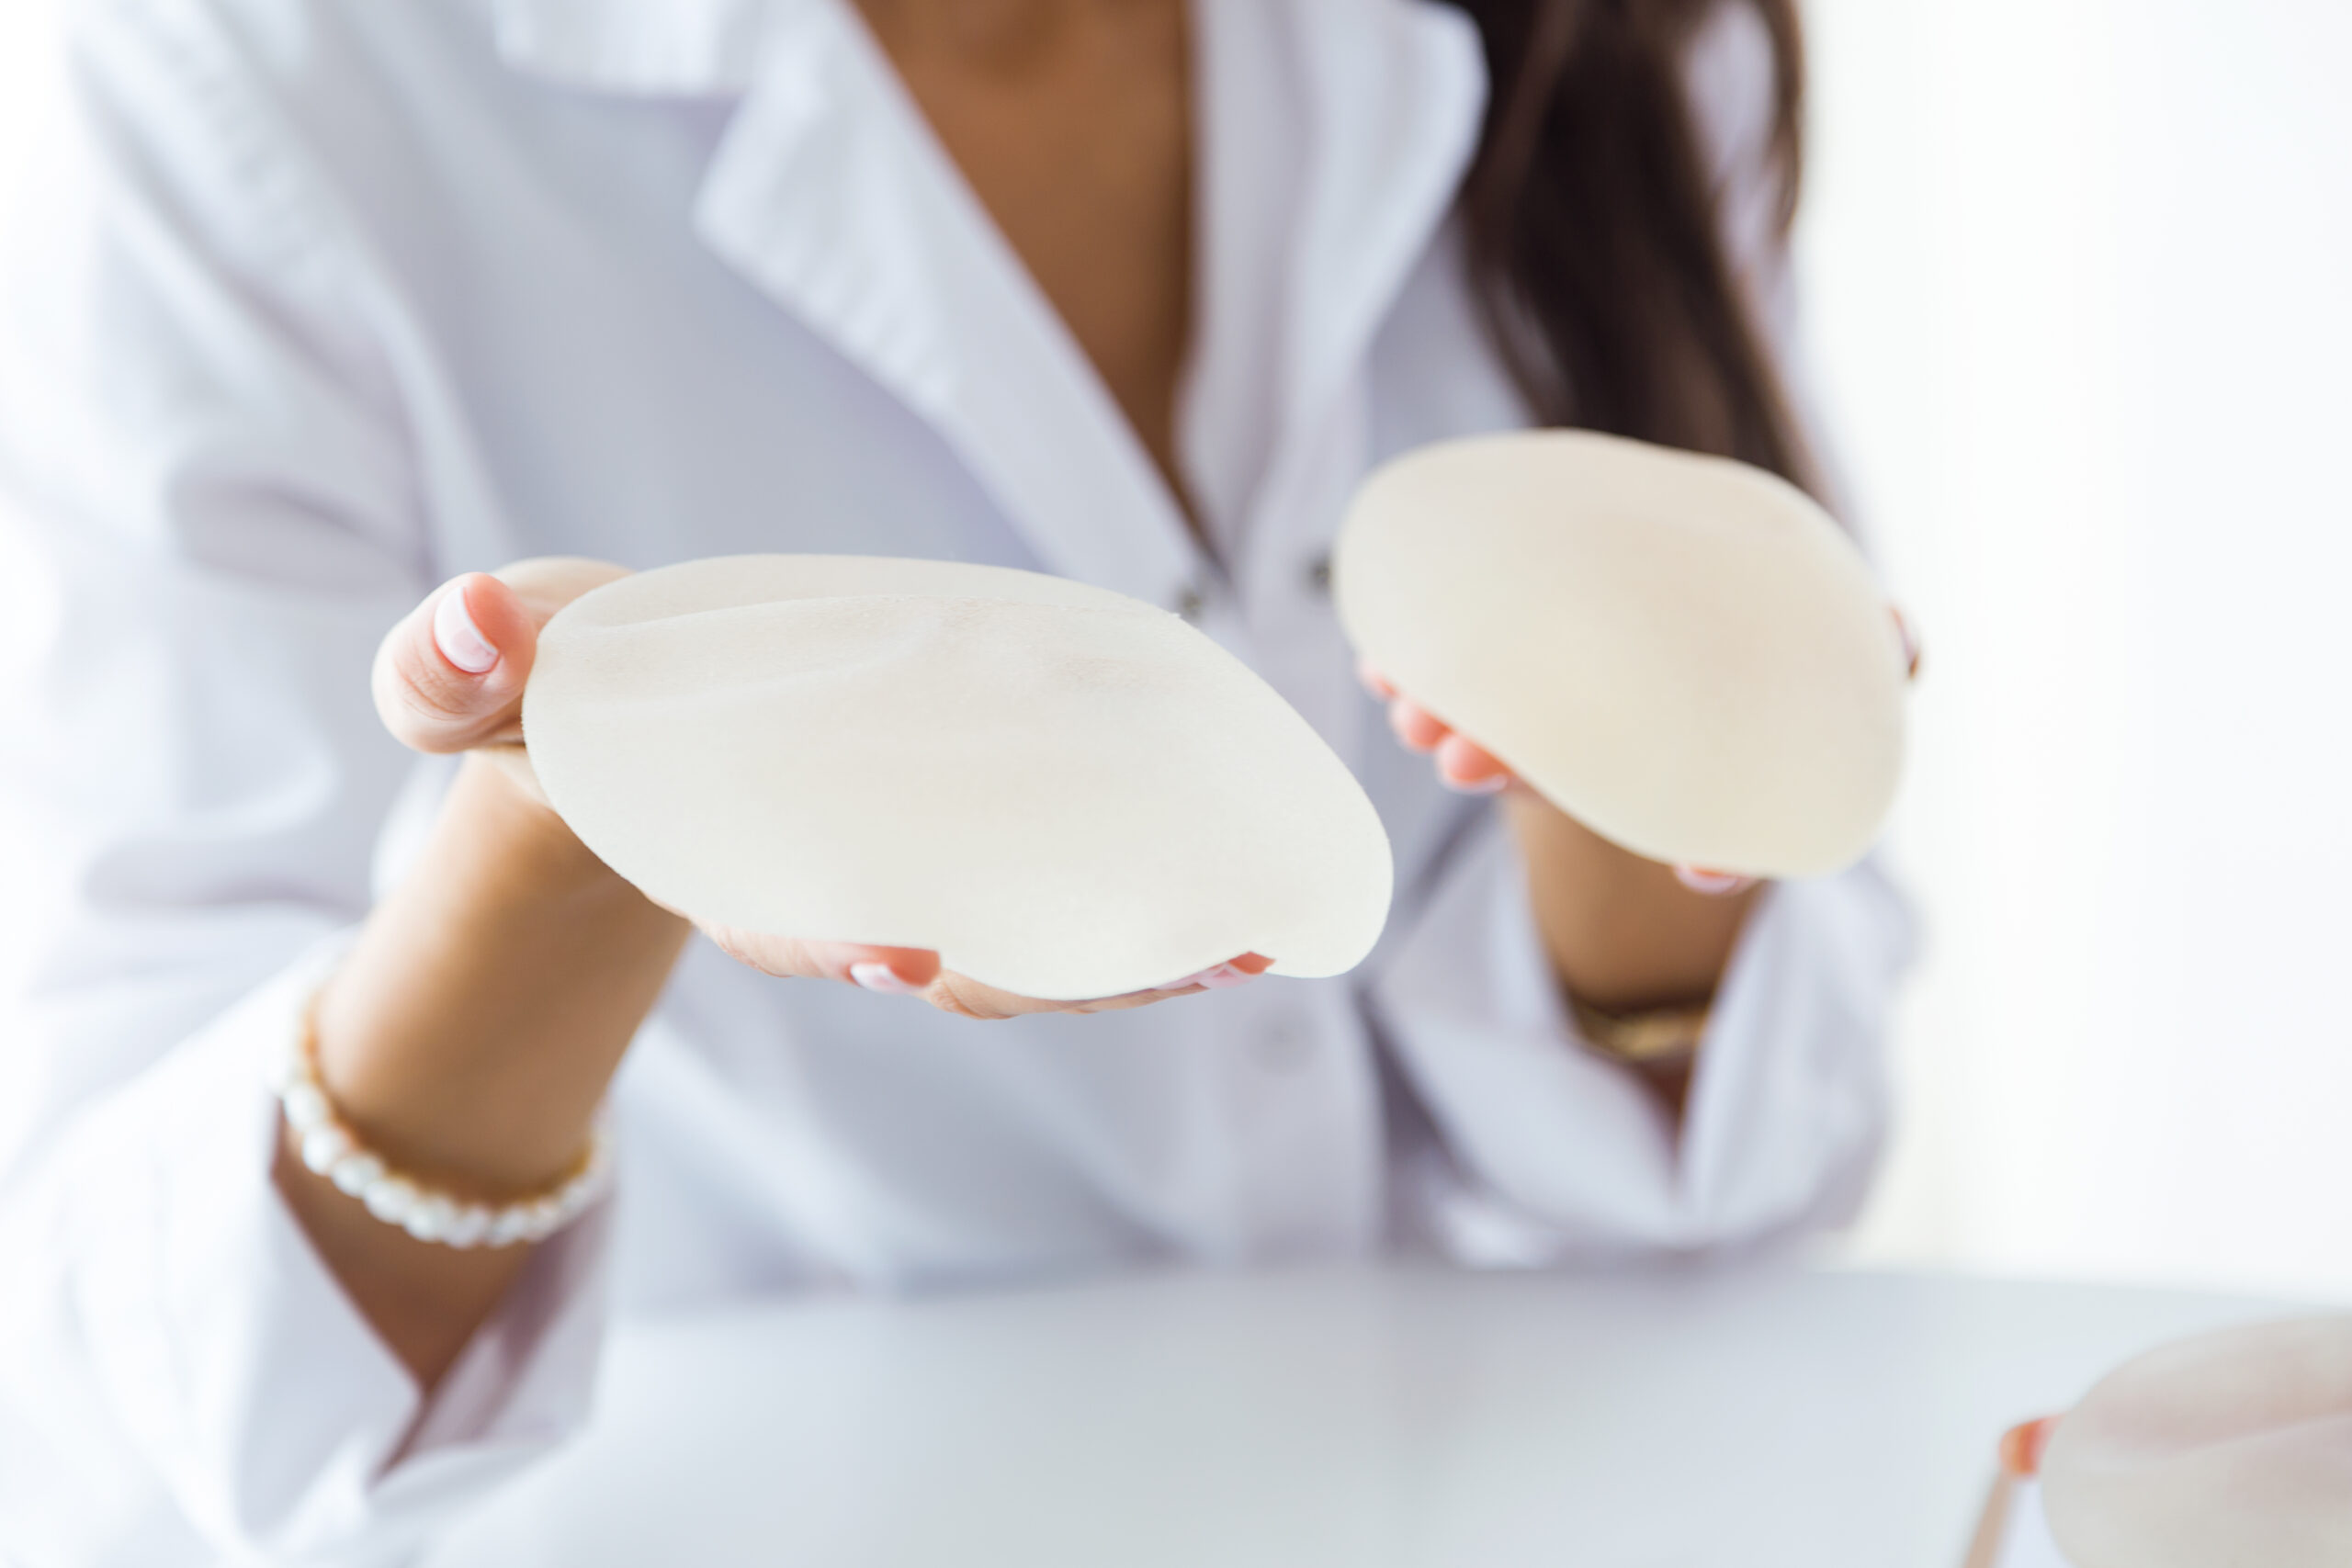 breast implant removal surgery london plastic surgeon